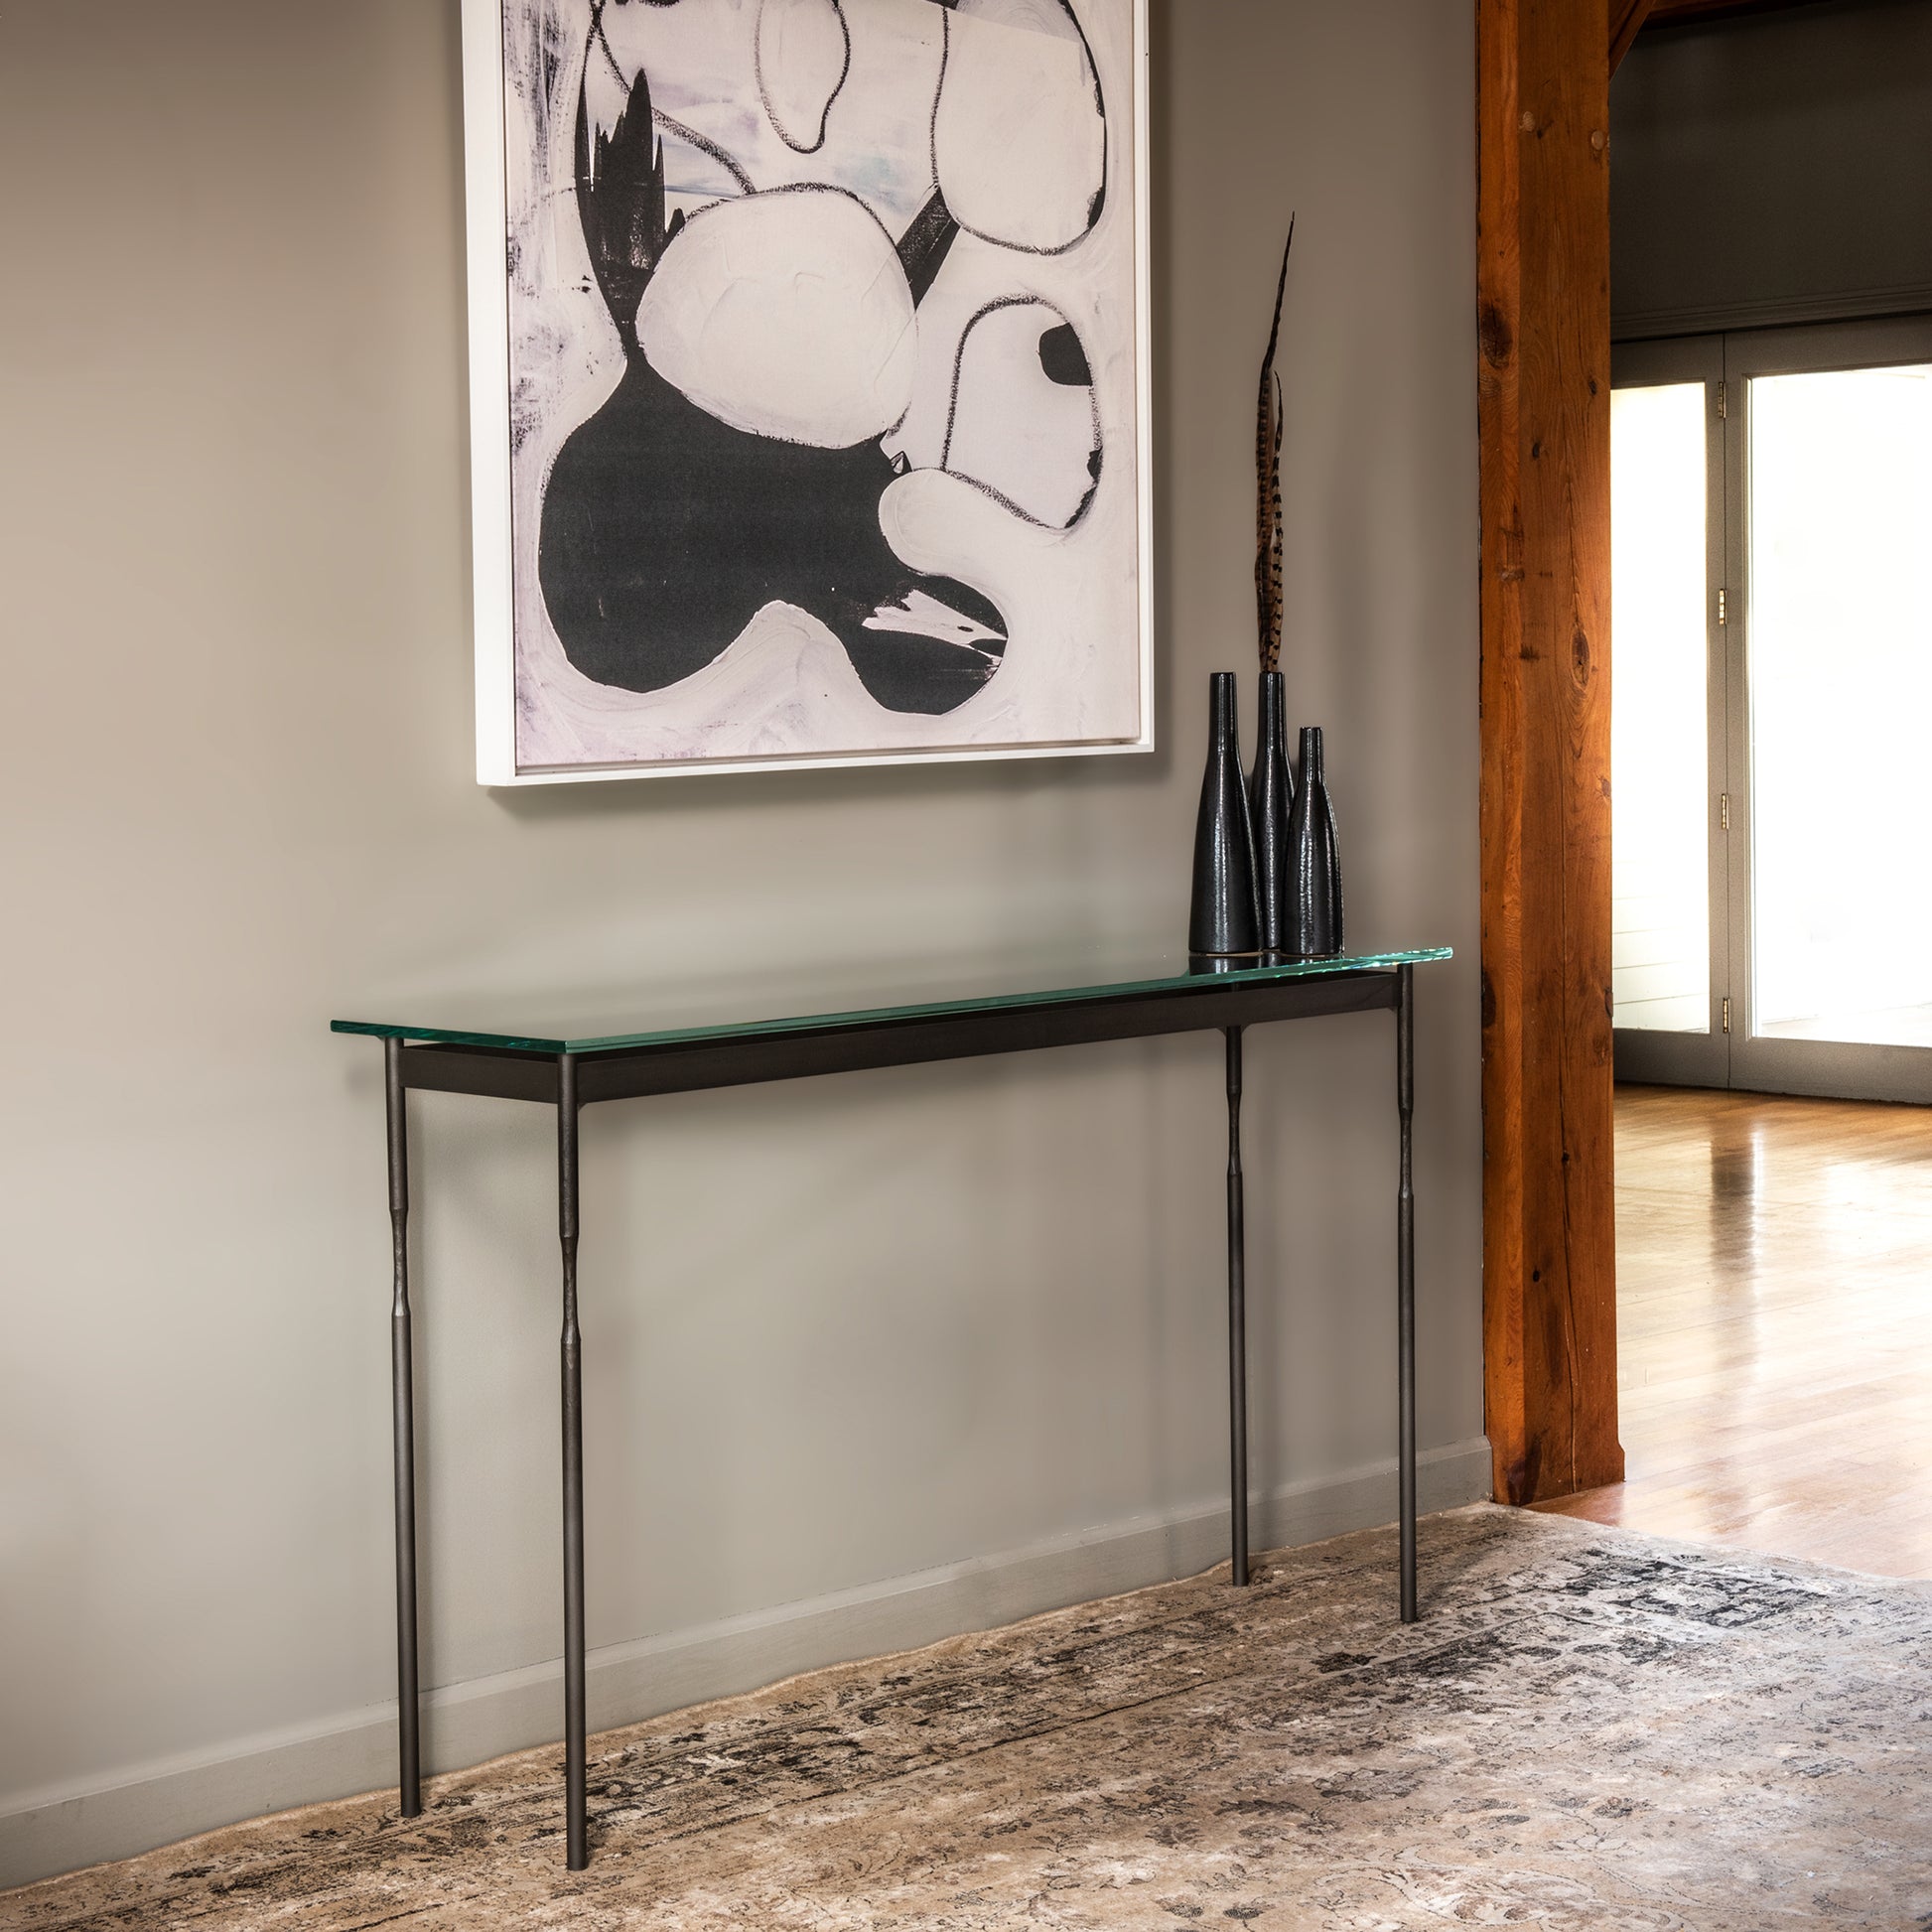 A Hubbardton Forge Senza Console Table with a tempered glass top in a room with a painting on the wall.